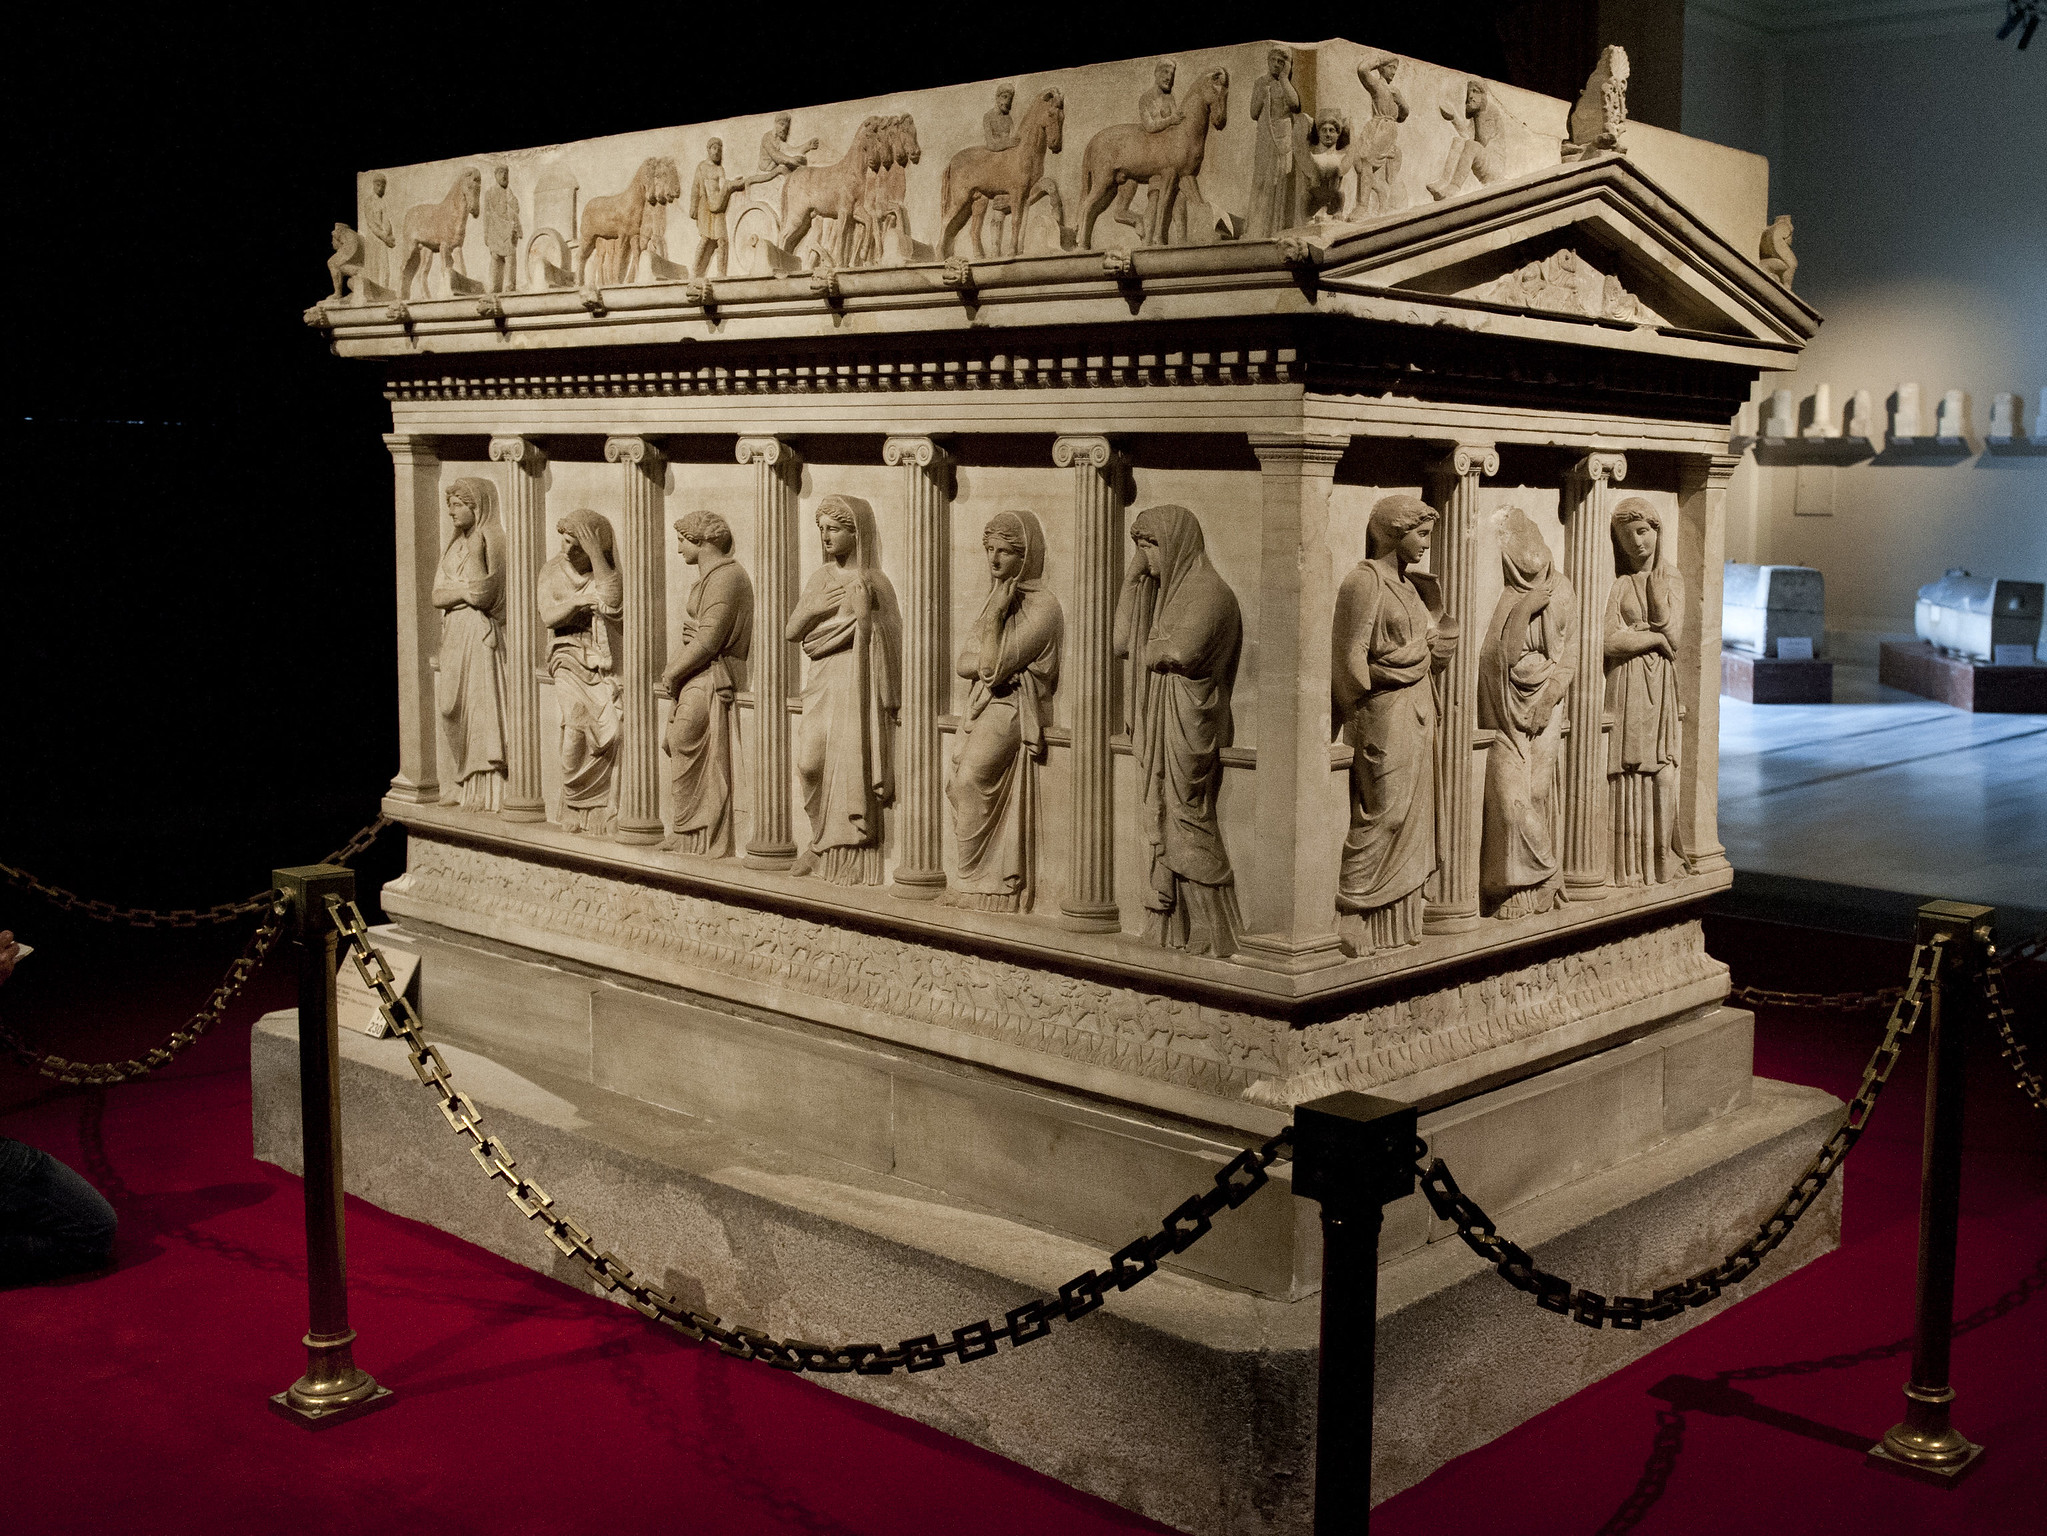 The sarcophagus of the mourning women, I